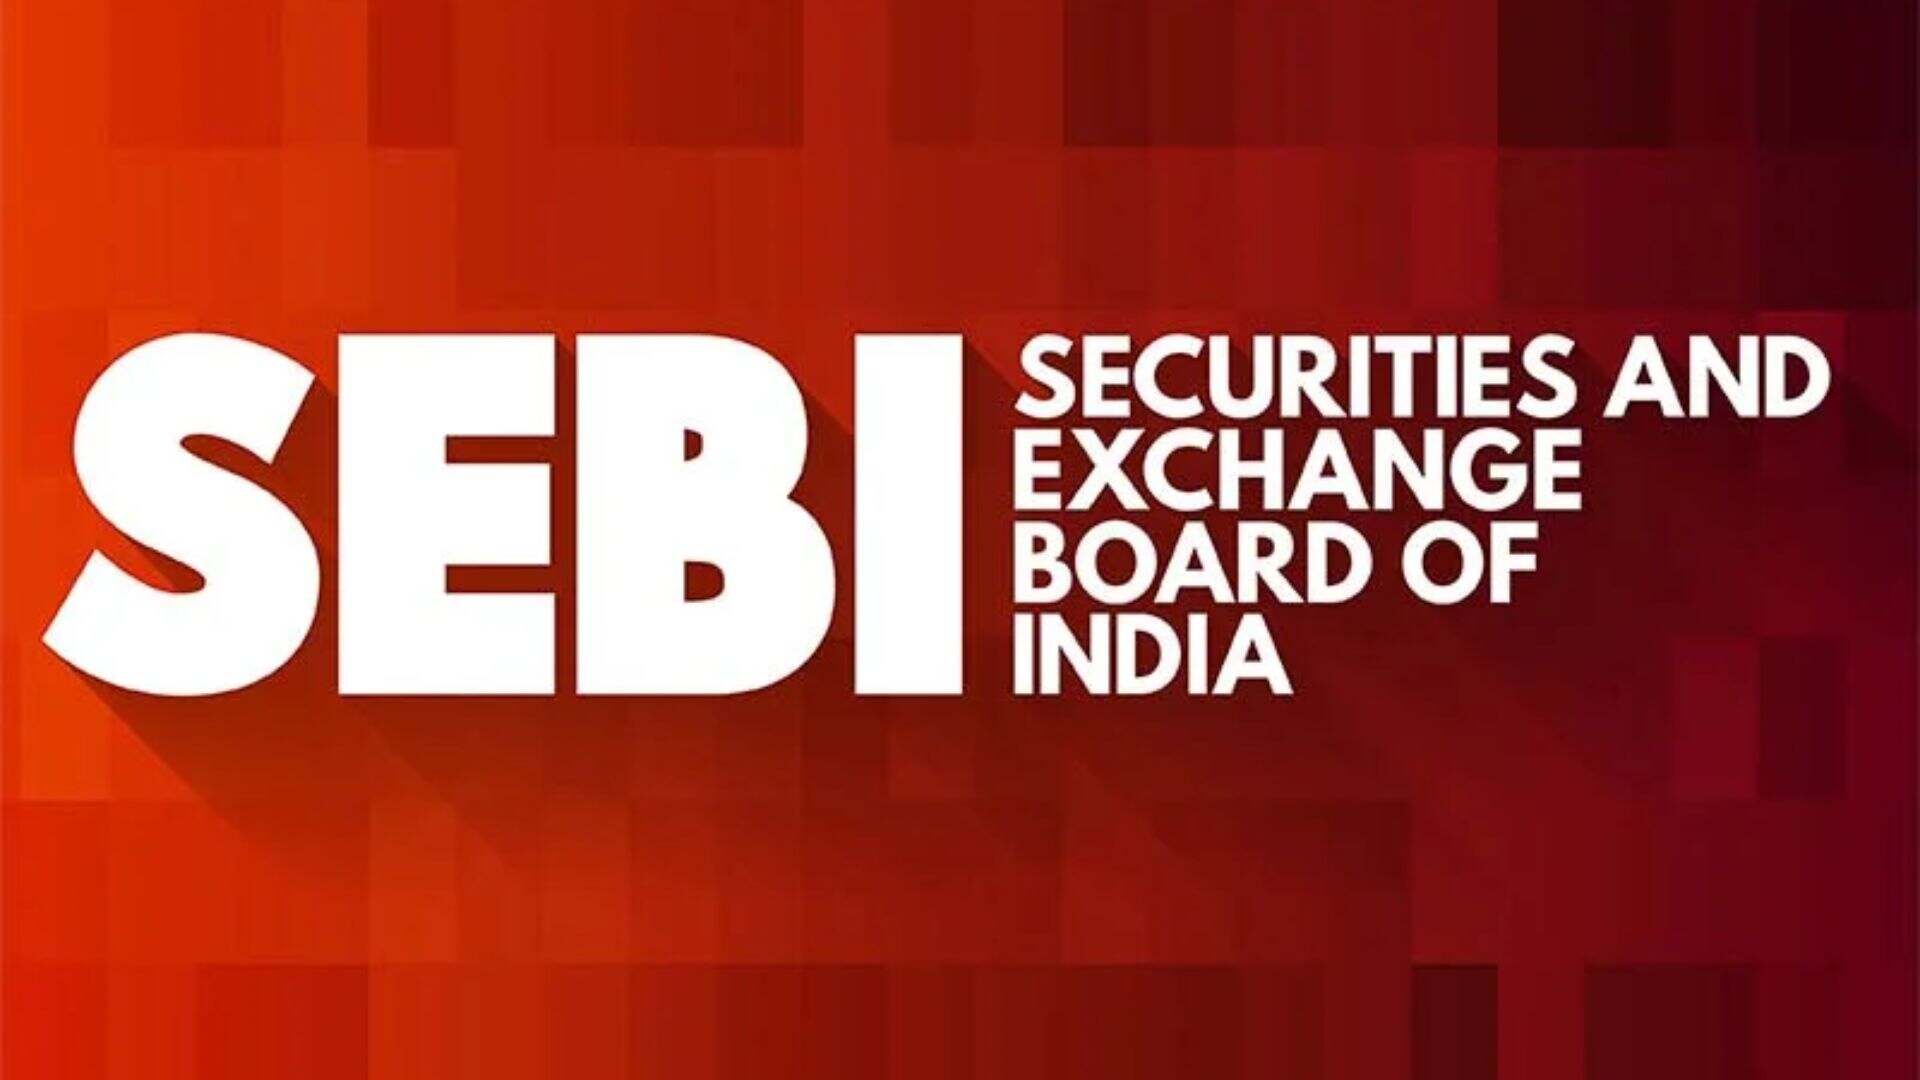 SEBI: Demat & Mutual Fund Accounts Safe Without Nomination Details